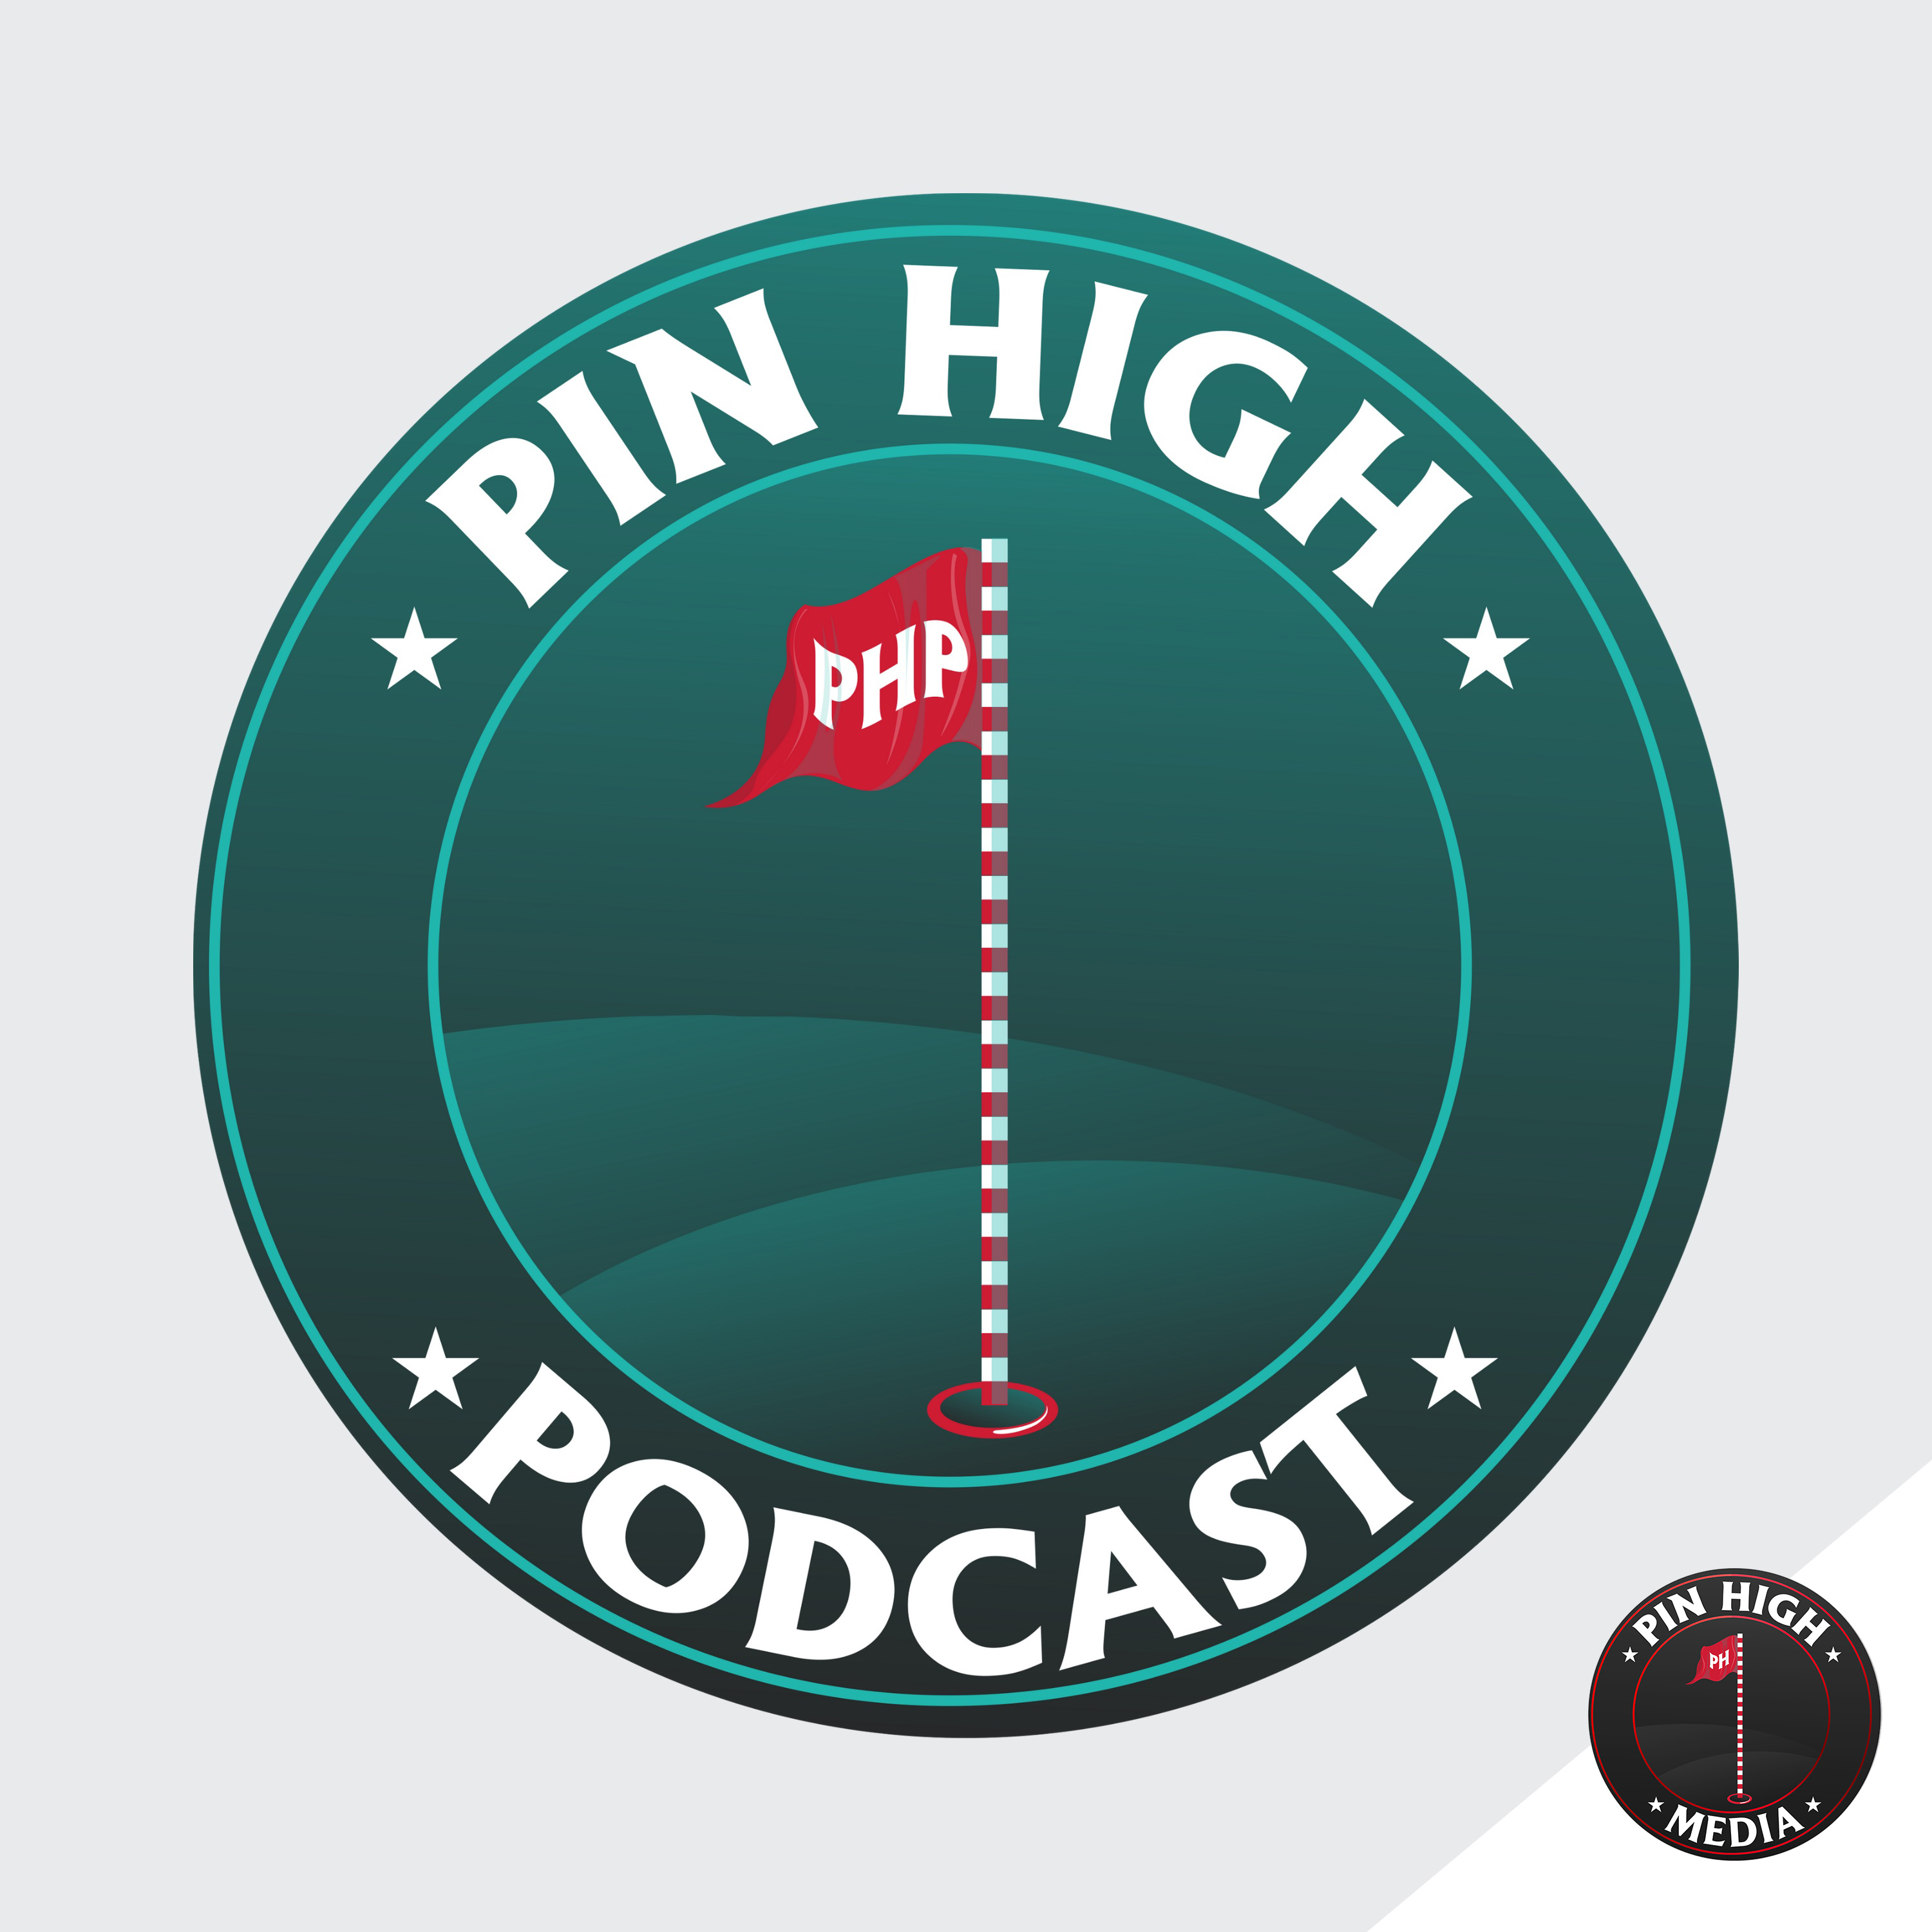 Pin High Podcast Ep. 144: We Watched LIV Golf!